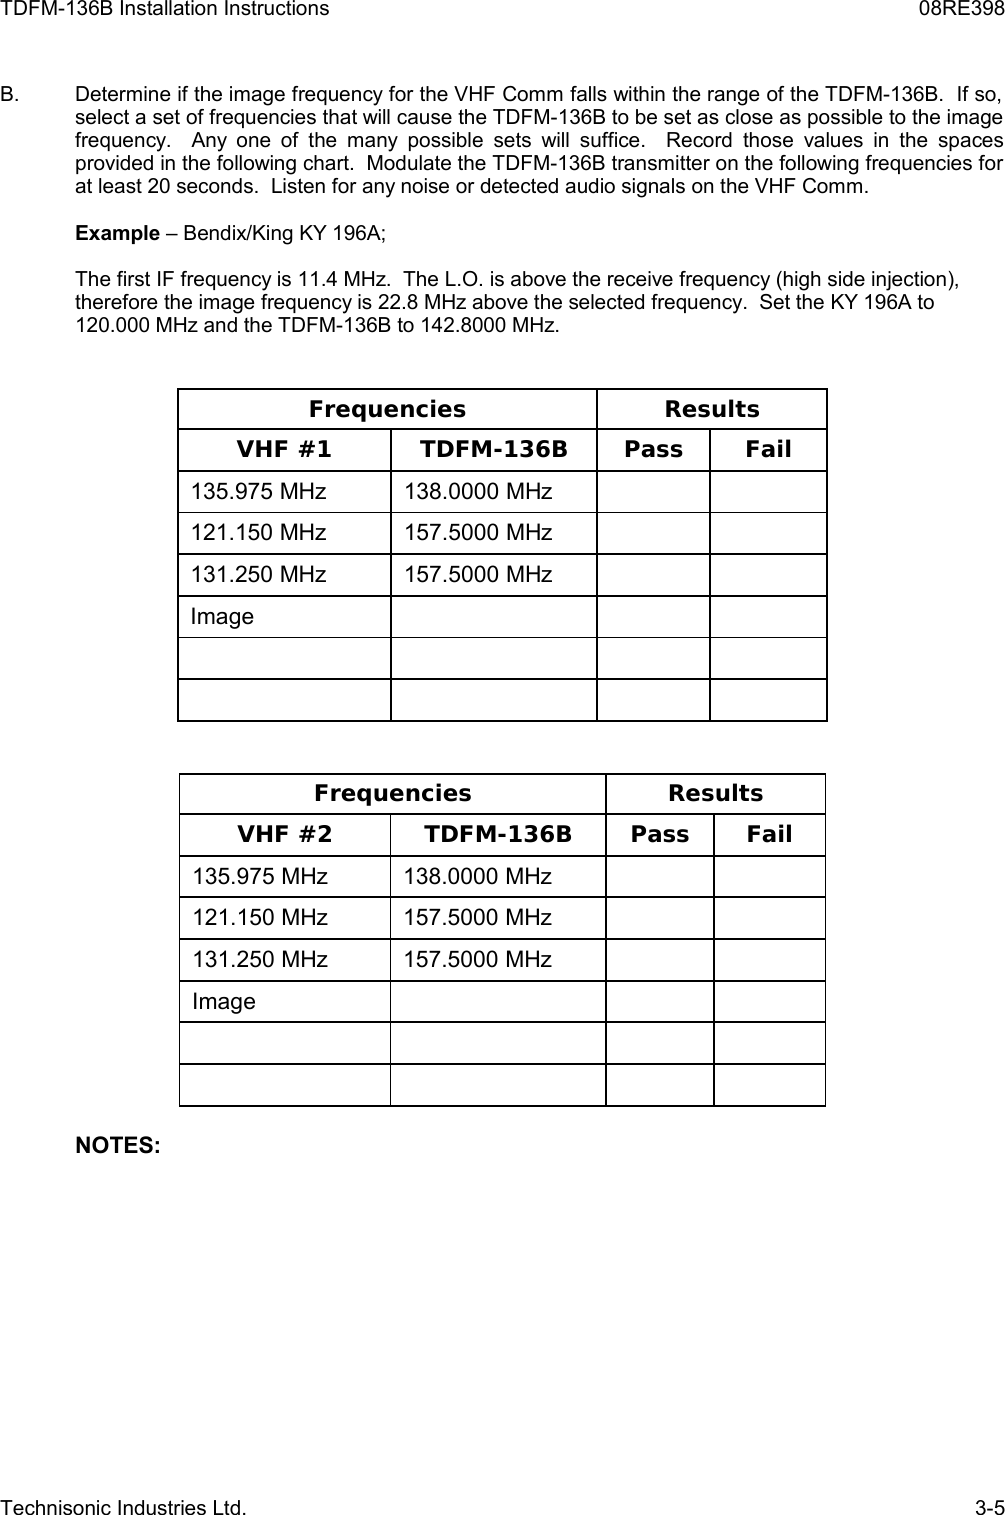 TDFM-136B Installation Instructions 08RE398B. Determine if the image frequency for the VHF Comm falls within the range of the TDFM-136B.  If so,  select a set of frequencies that will cause the TDFM-136B to be set as close as possible to the image frequency.   Any one of the many possible  sets will suffice.   Record those  values in the  spaces provided in the following chart.  Modulate the TDFM-136B transmitter on the following frequencies for at least 20 seconds.  Listen for any noise or detected audio signals on the VHF Comm.Example – Bendix/King KY 196A;The first IF frequency is 11.4 MHz.  The L.O. is above the receive frequency (high side injection), therefore the image frequency is 22.8 MHz above the selected frequency.  Set the KY 196A to 120.000 MHz and the TDFM-136B to 142.8000 MHz.Frequencies ResultsVHF #1 TDFM-136B Pass Fail135.975 MHz 138.0000 MHz121.150 MHz 157.5000 MHz131.250 MHz 157.5000 MHzImageFrequencies ResultsVHF #2 TDFM-136B Pass Fail135.975 MHz 138.0000 MHz121.150 MHz 157.5000 MHz131.250 MHz 157.5000 MHzImageNOTES:Technisonic Industries Ltd. 3-5